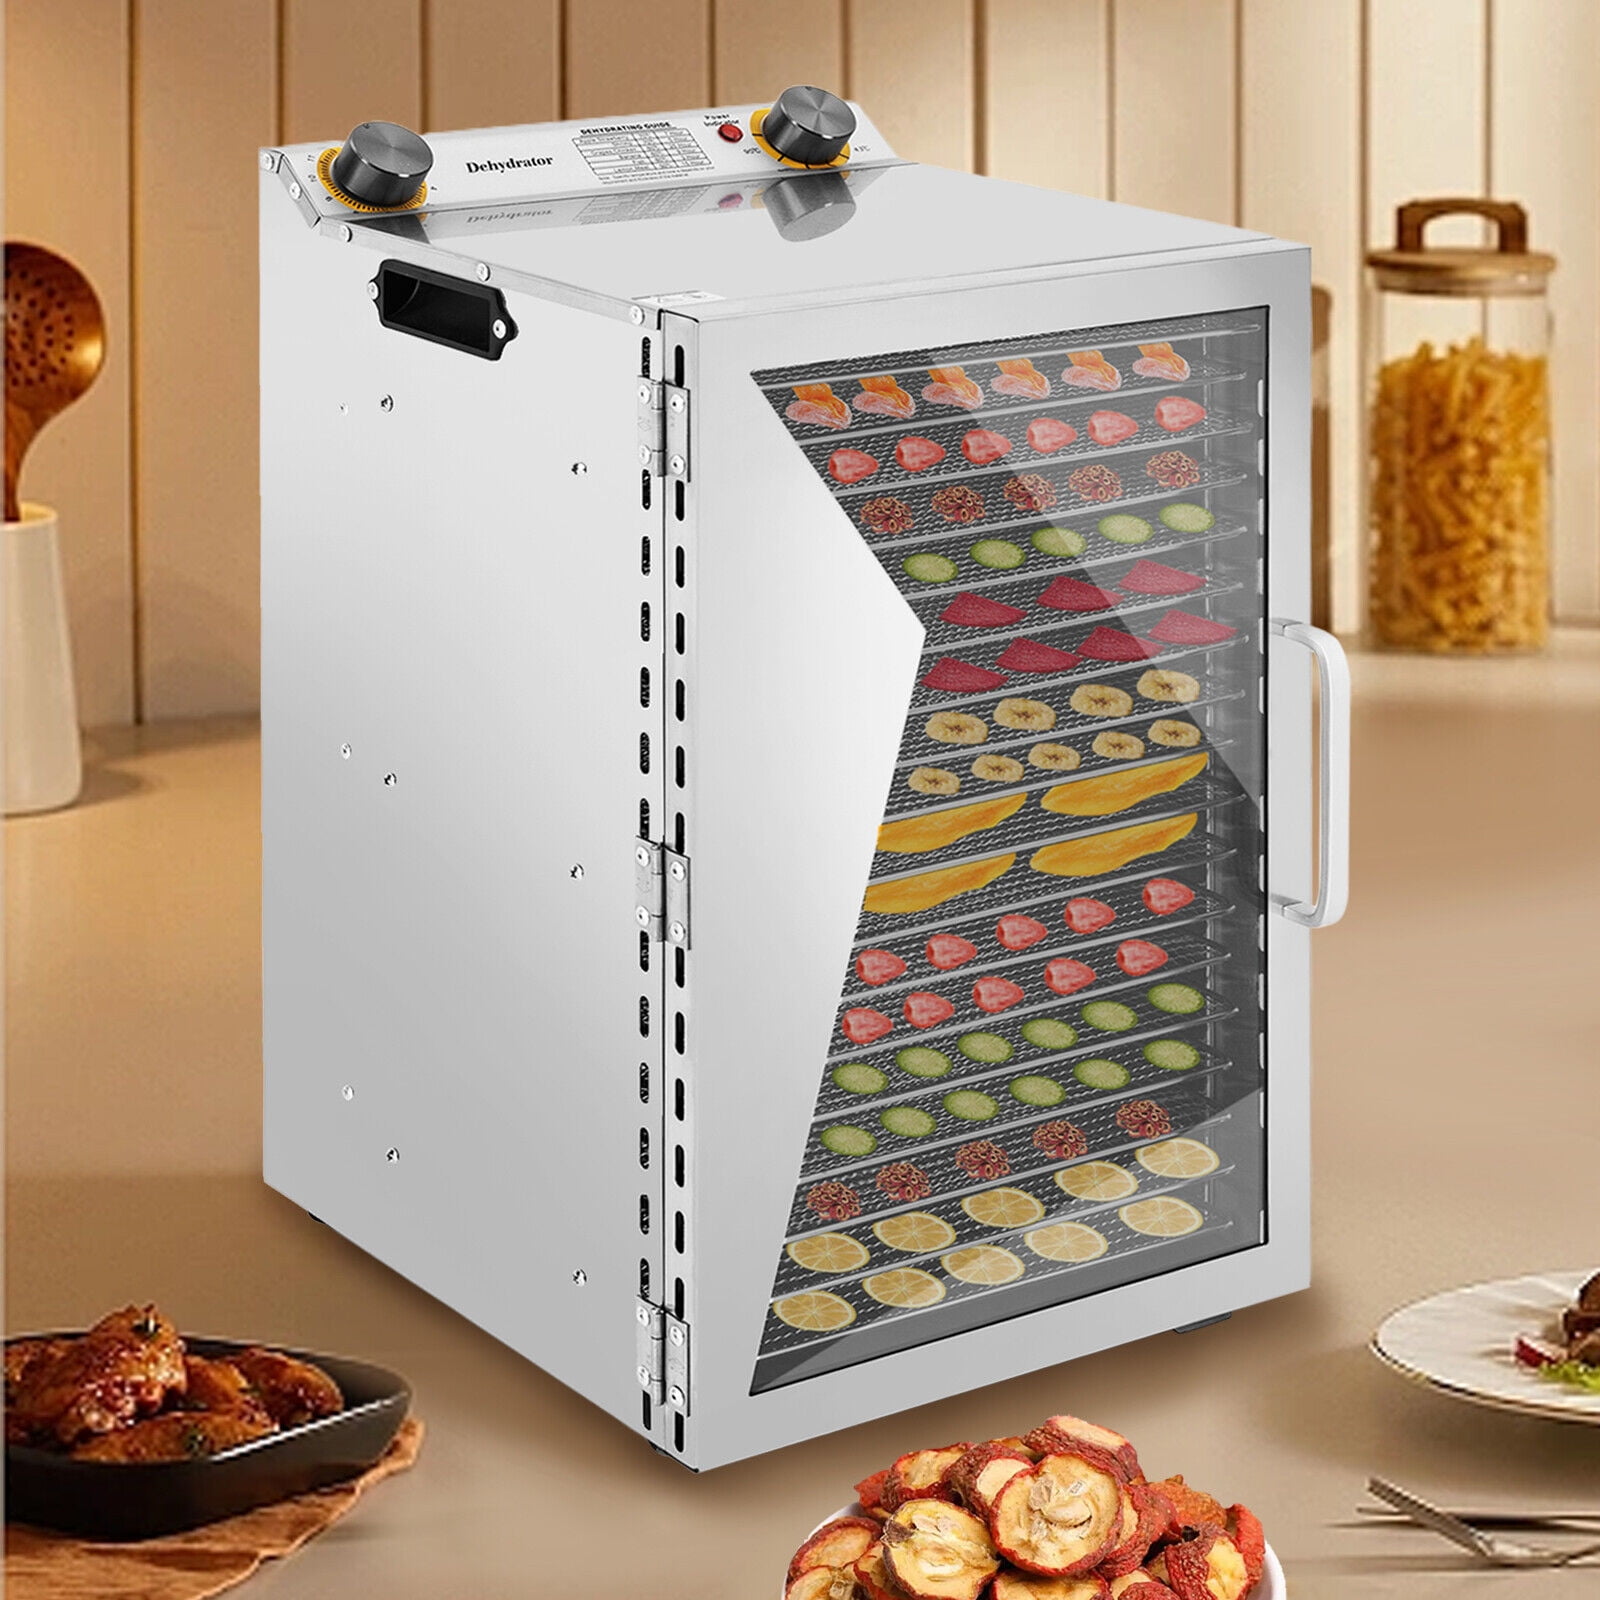 Nutrichef Food Dehydrator Machine | Dehydrates Beef Jerky, Meat, Food,  Fruit, Vegetables & Dog Treats | Great For At Home Use | High-Heat  Circulation